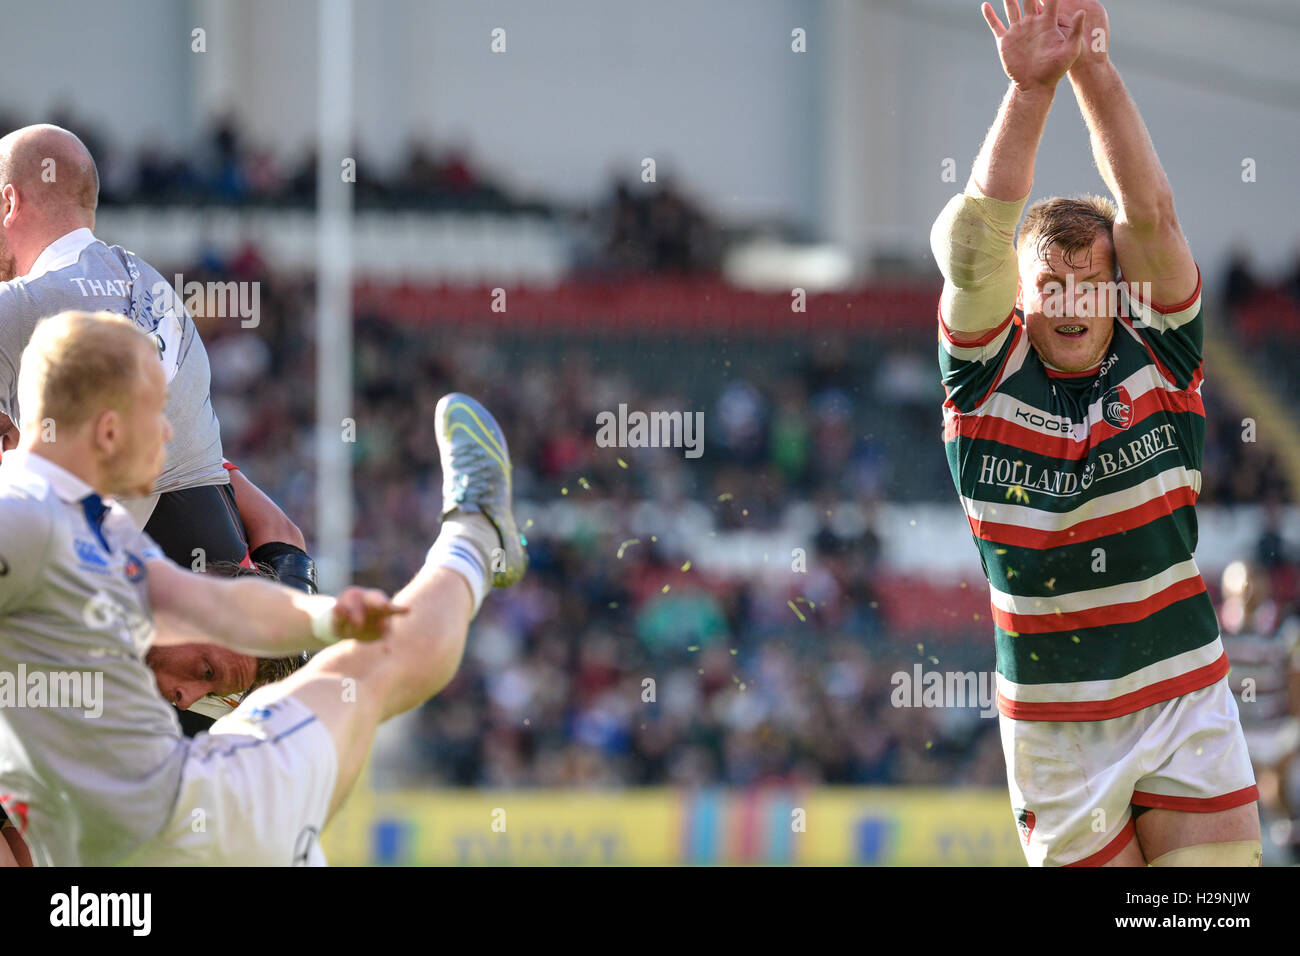 Leicester Tigers Vs Bath Rugby an der Welford Road, 25.09.16. Stockfoto